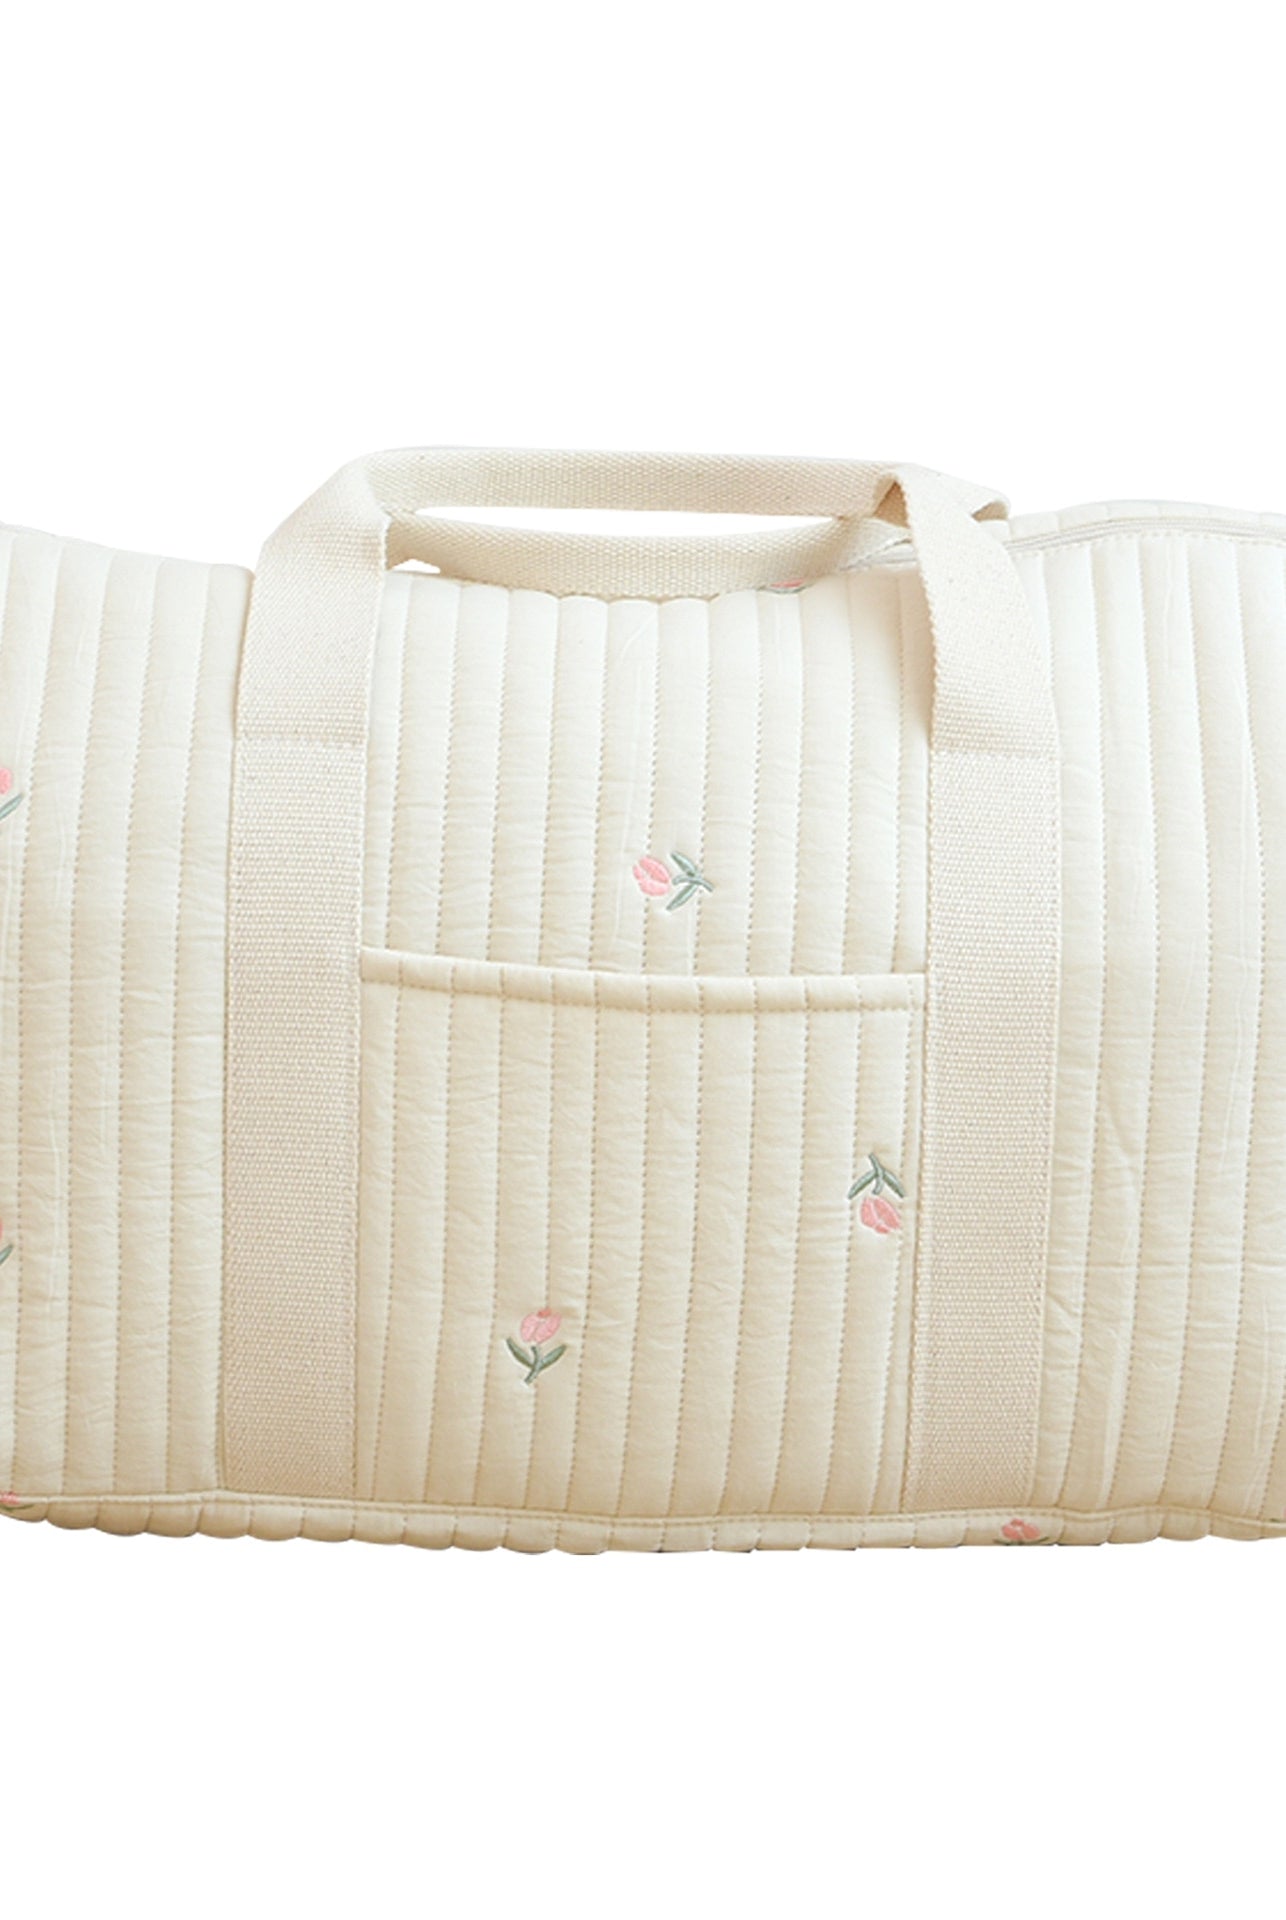 Adorably Quilted Maternity Bag - Tuilips